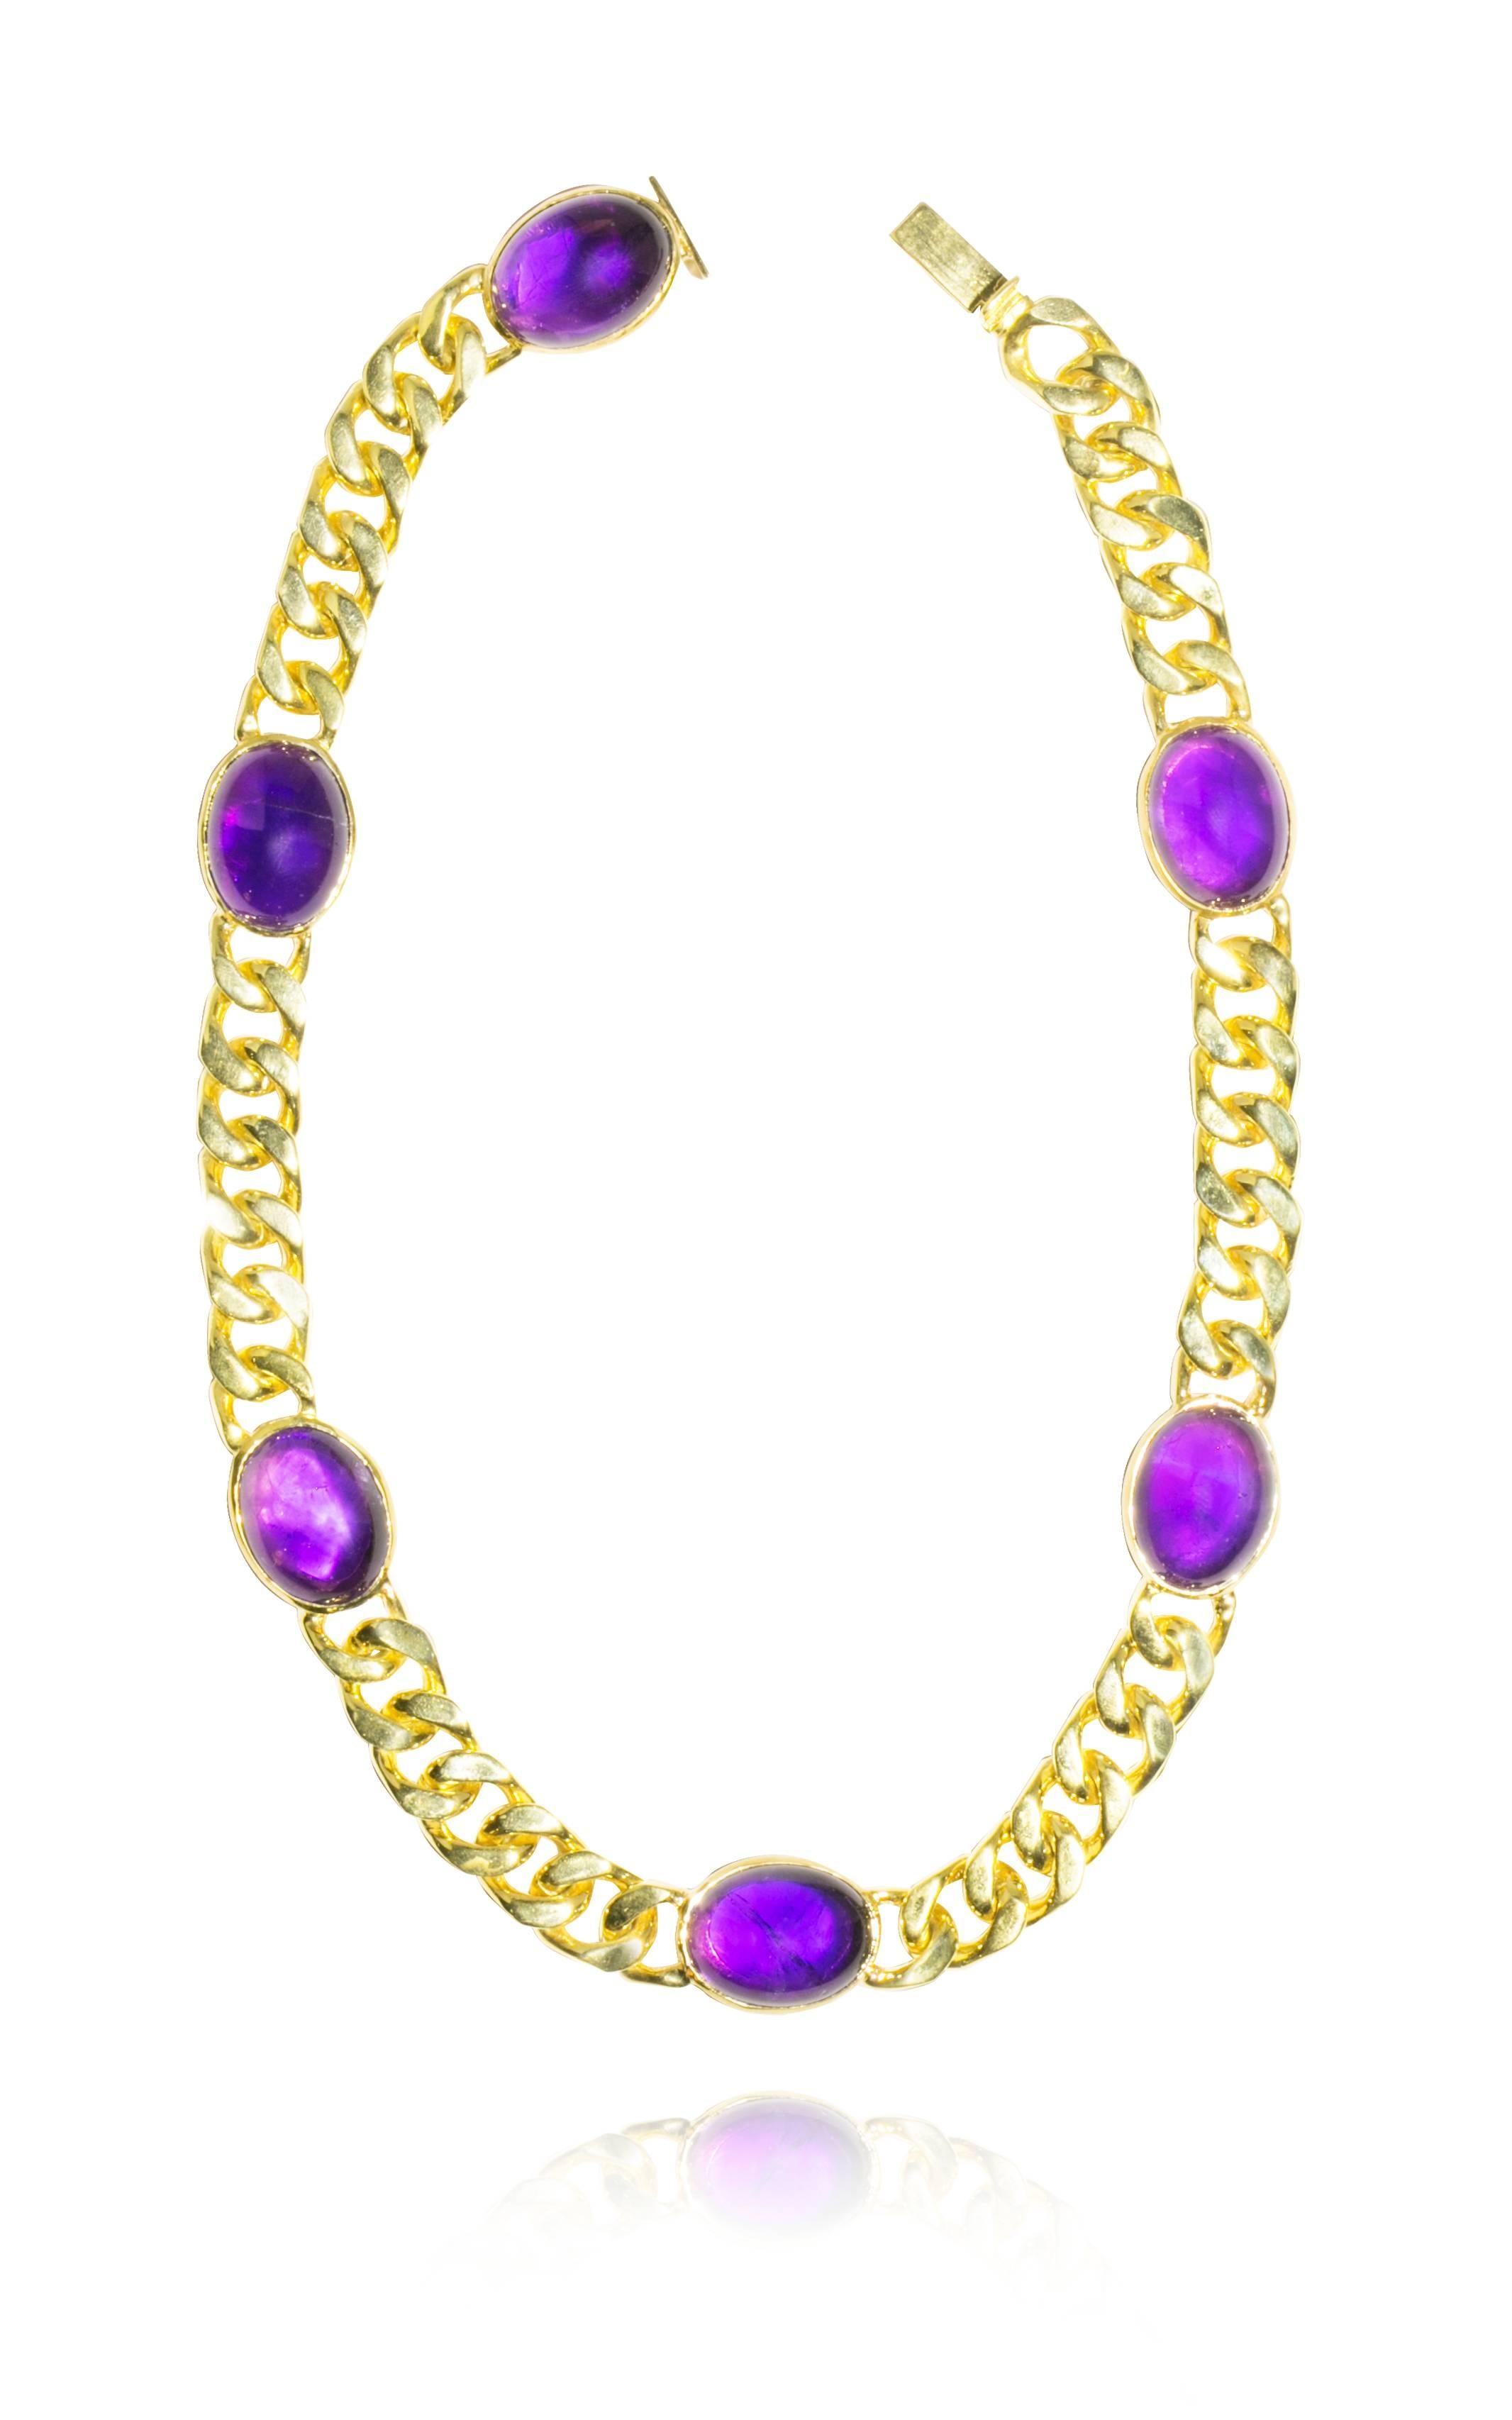 Wide Gourmette chain-link necklace with intermittent oval Amethyst cabochons which gives a formal and luxurious image.

Overall length of the necklace 42cm.
Links are 1cm wide and the cabochon Amethyst are 2cm in length and 1.5cm in